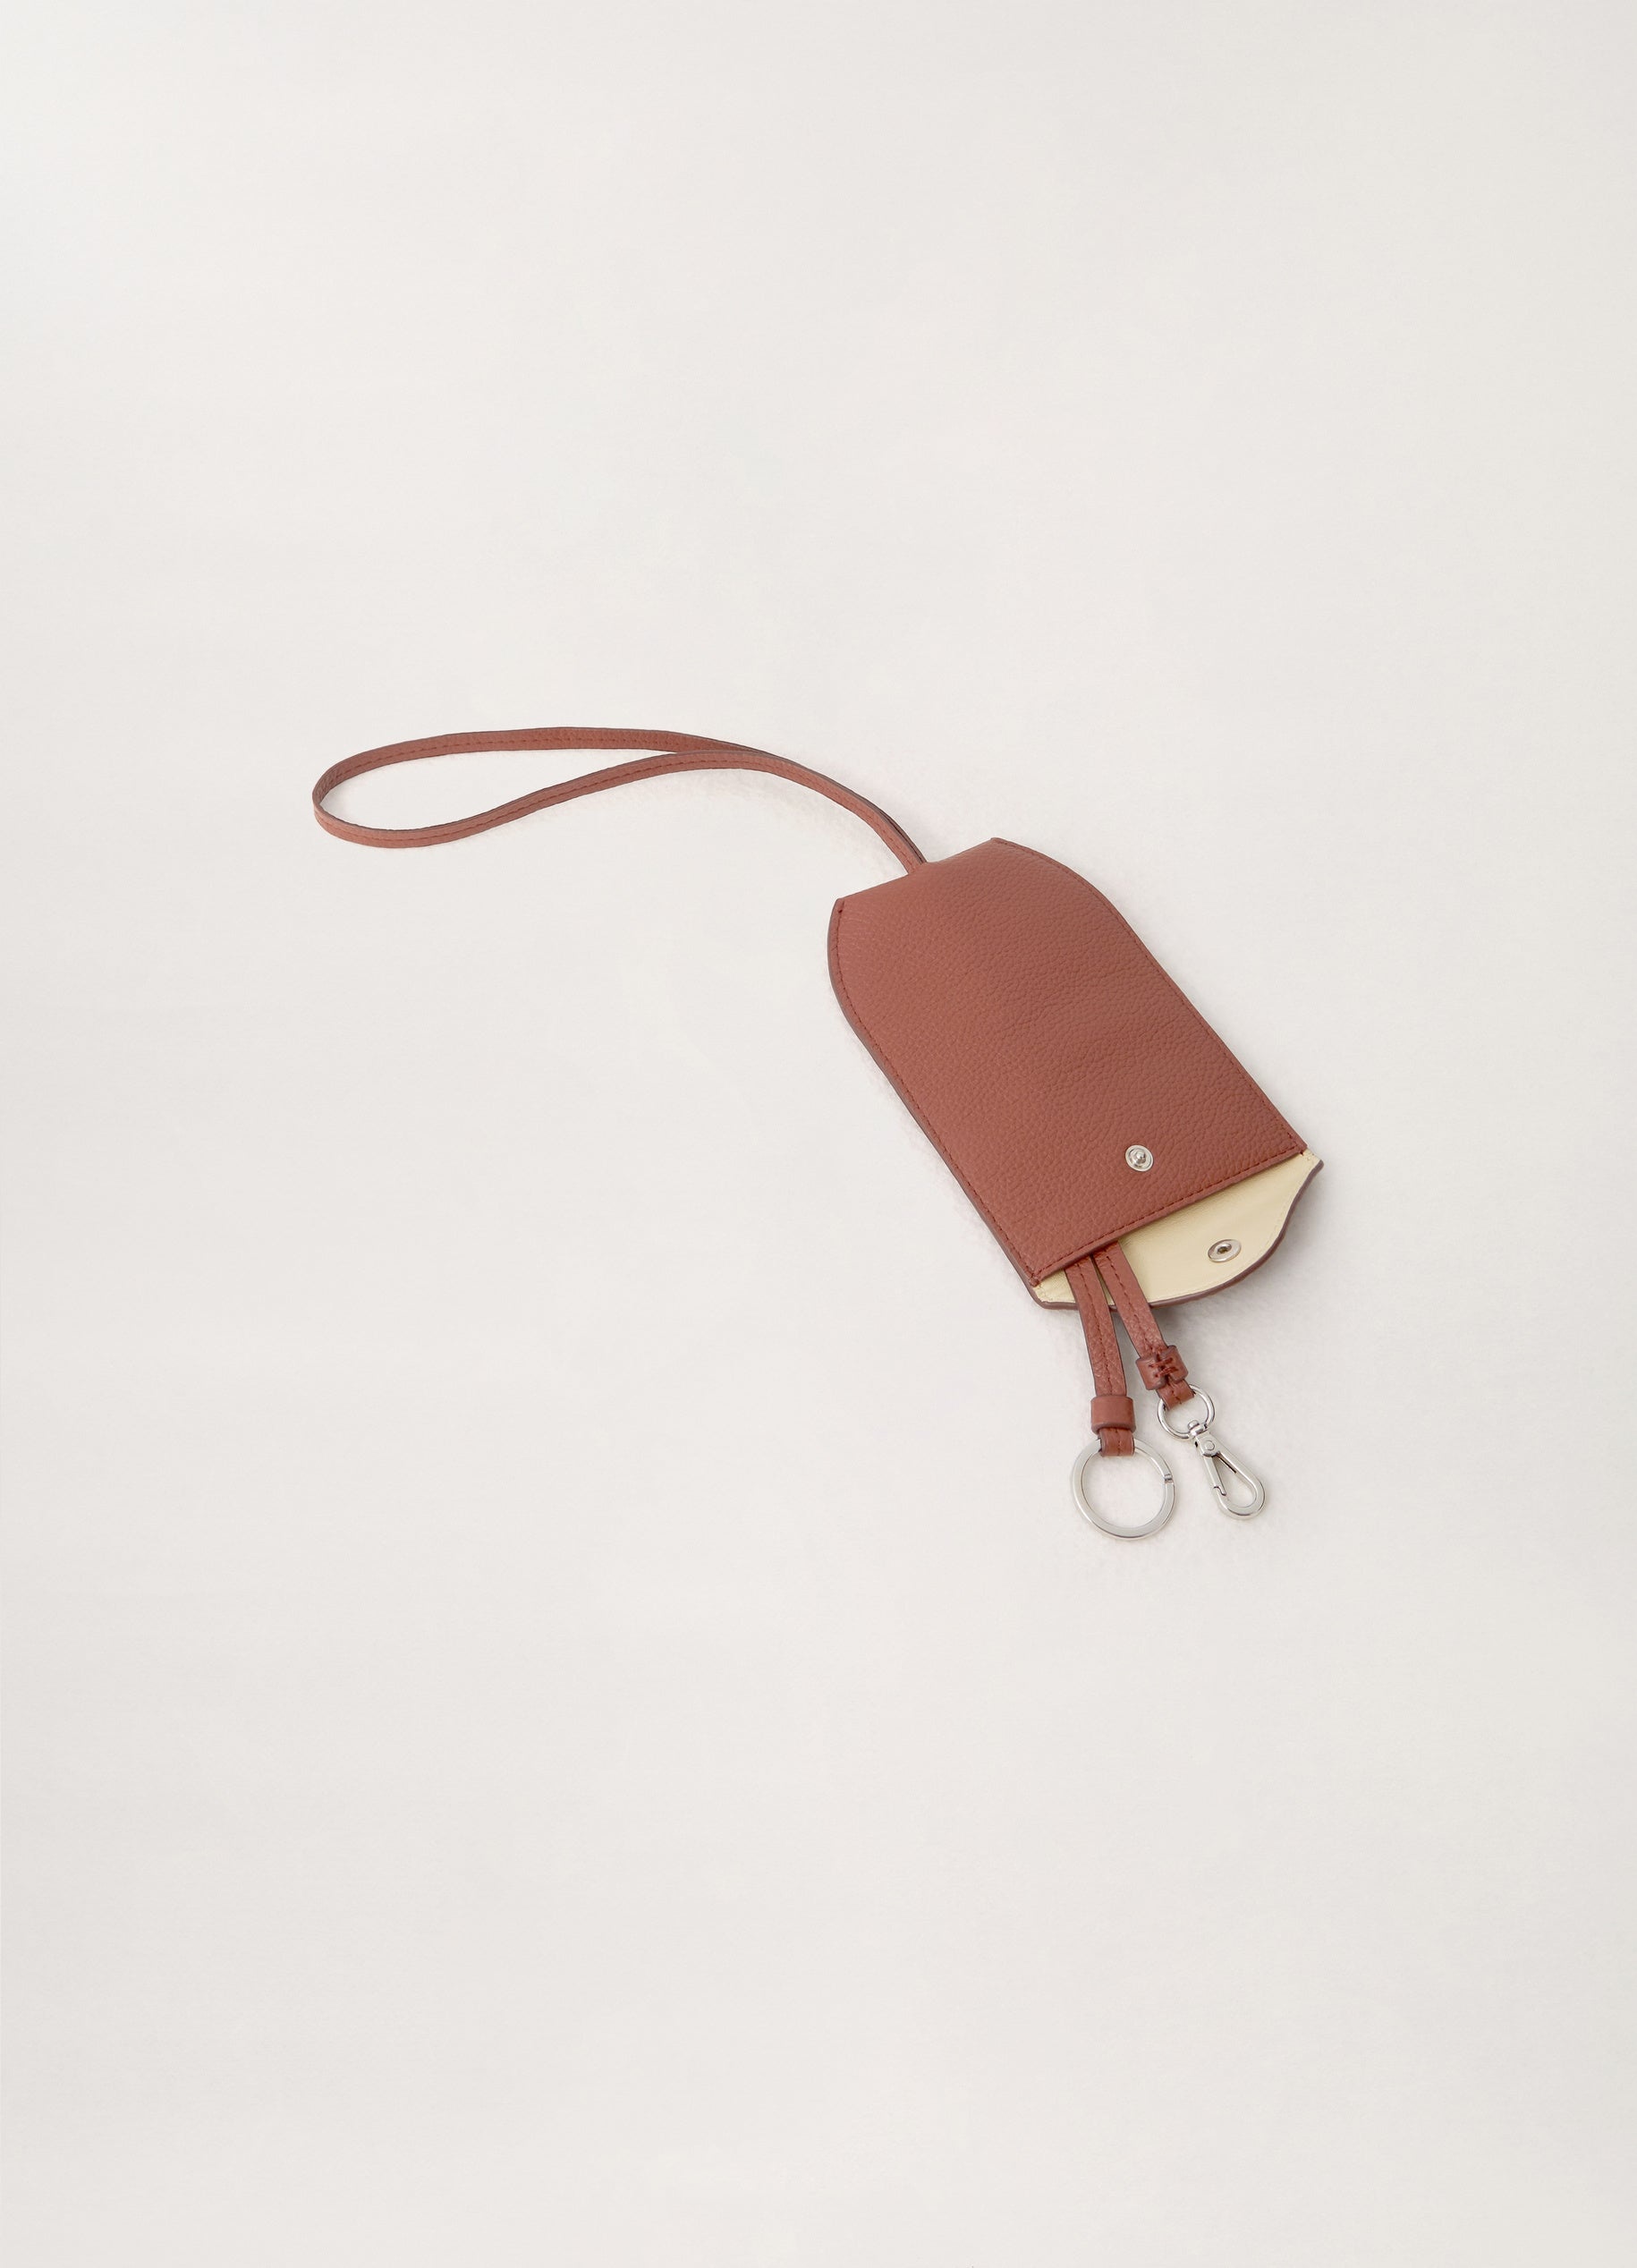 ENVELOPPE KEY RING POUCH
SOFT GRAINED LEATHER - 2